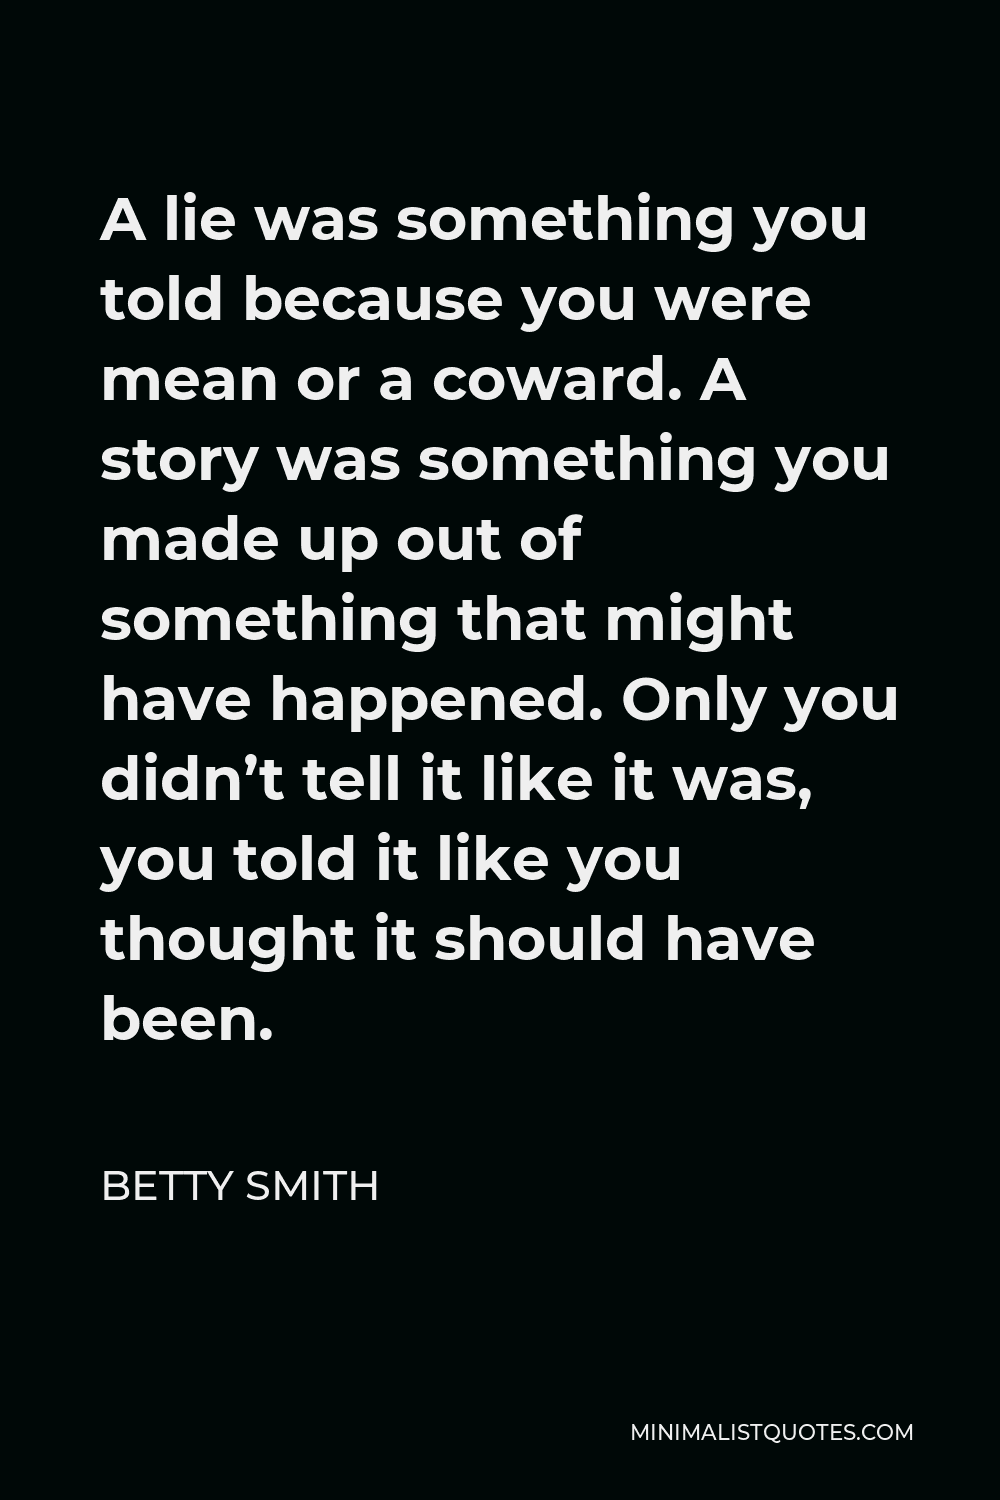 Betty Smith Quote - A lie was something you told because you were mean or a coward. A story was something you made up out of something that might have happened. Only you didn’t tell it like it was, you told it like you thought it should have been.